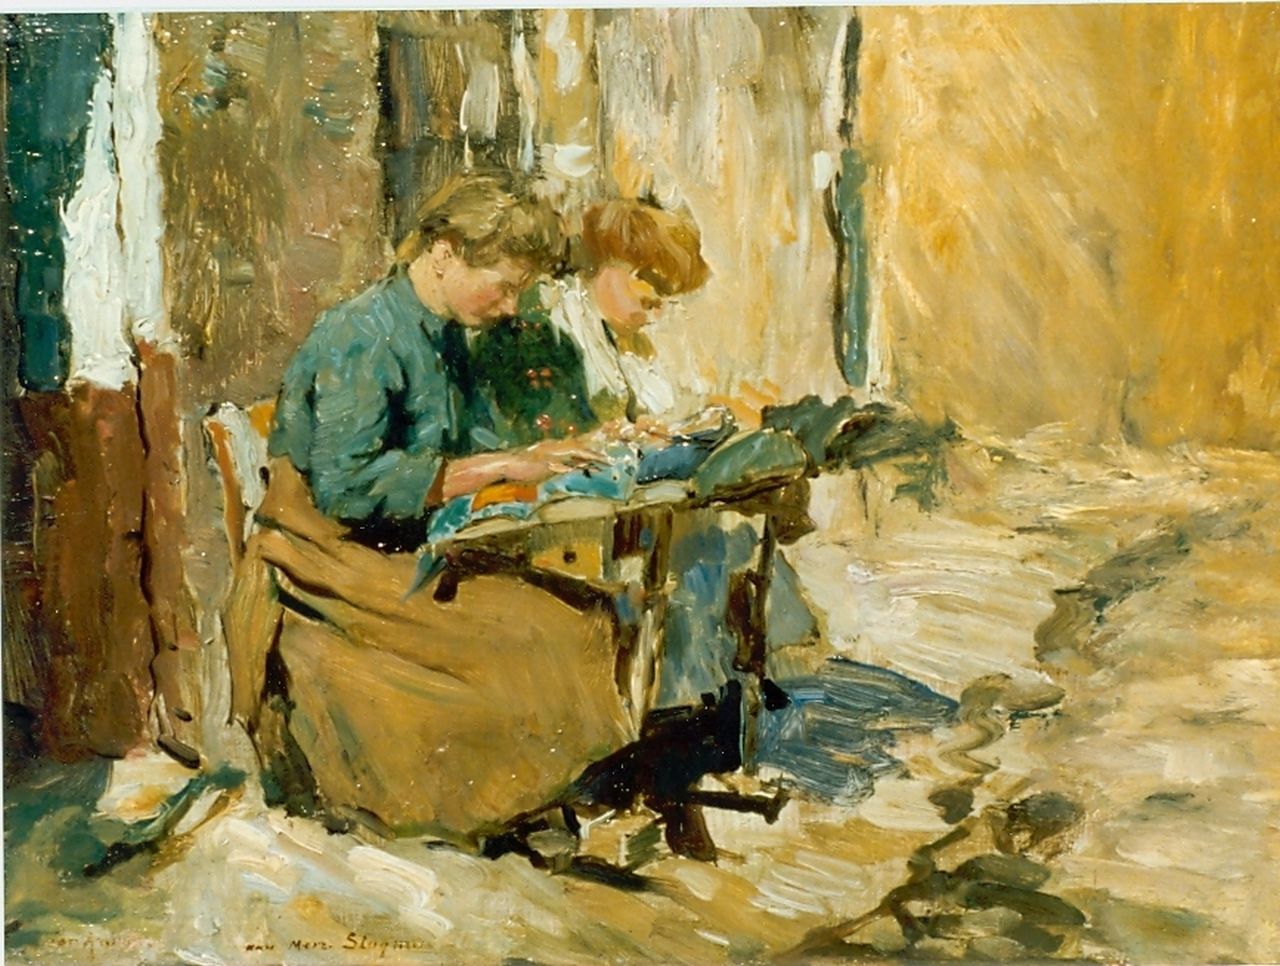 Anrooy J.A.M. van | 'Jan' Adriaan Marie van Anrooy, Making bobbin lace 'Dentellieres', oil on panel 26.0 x 35.5 cm, signed l.l.